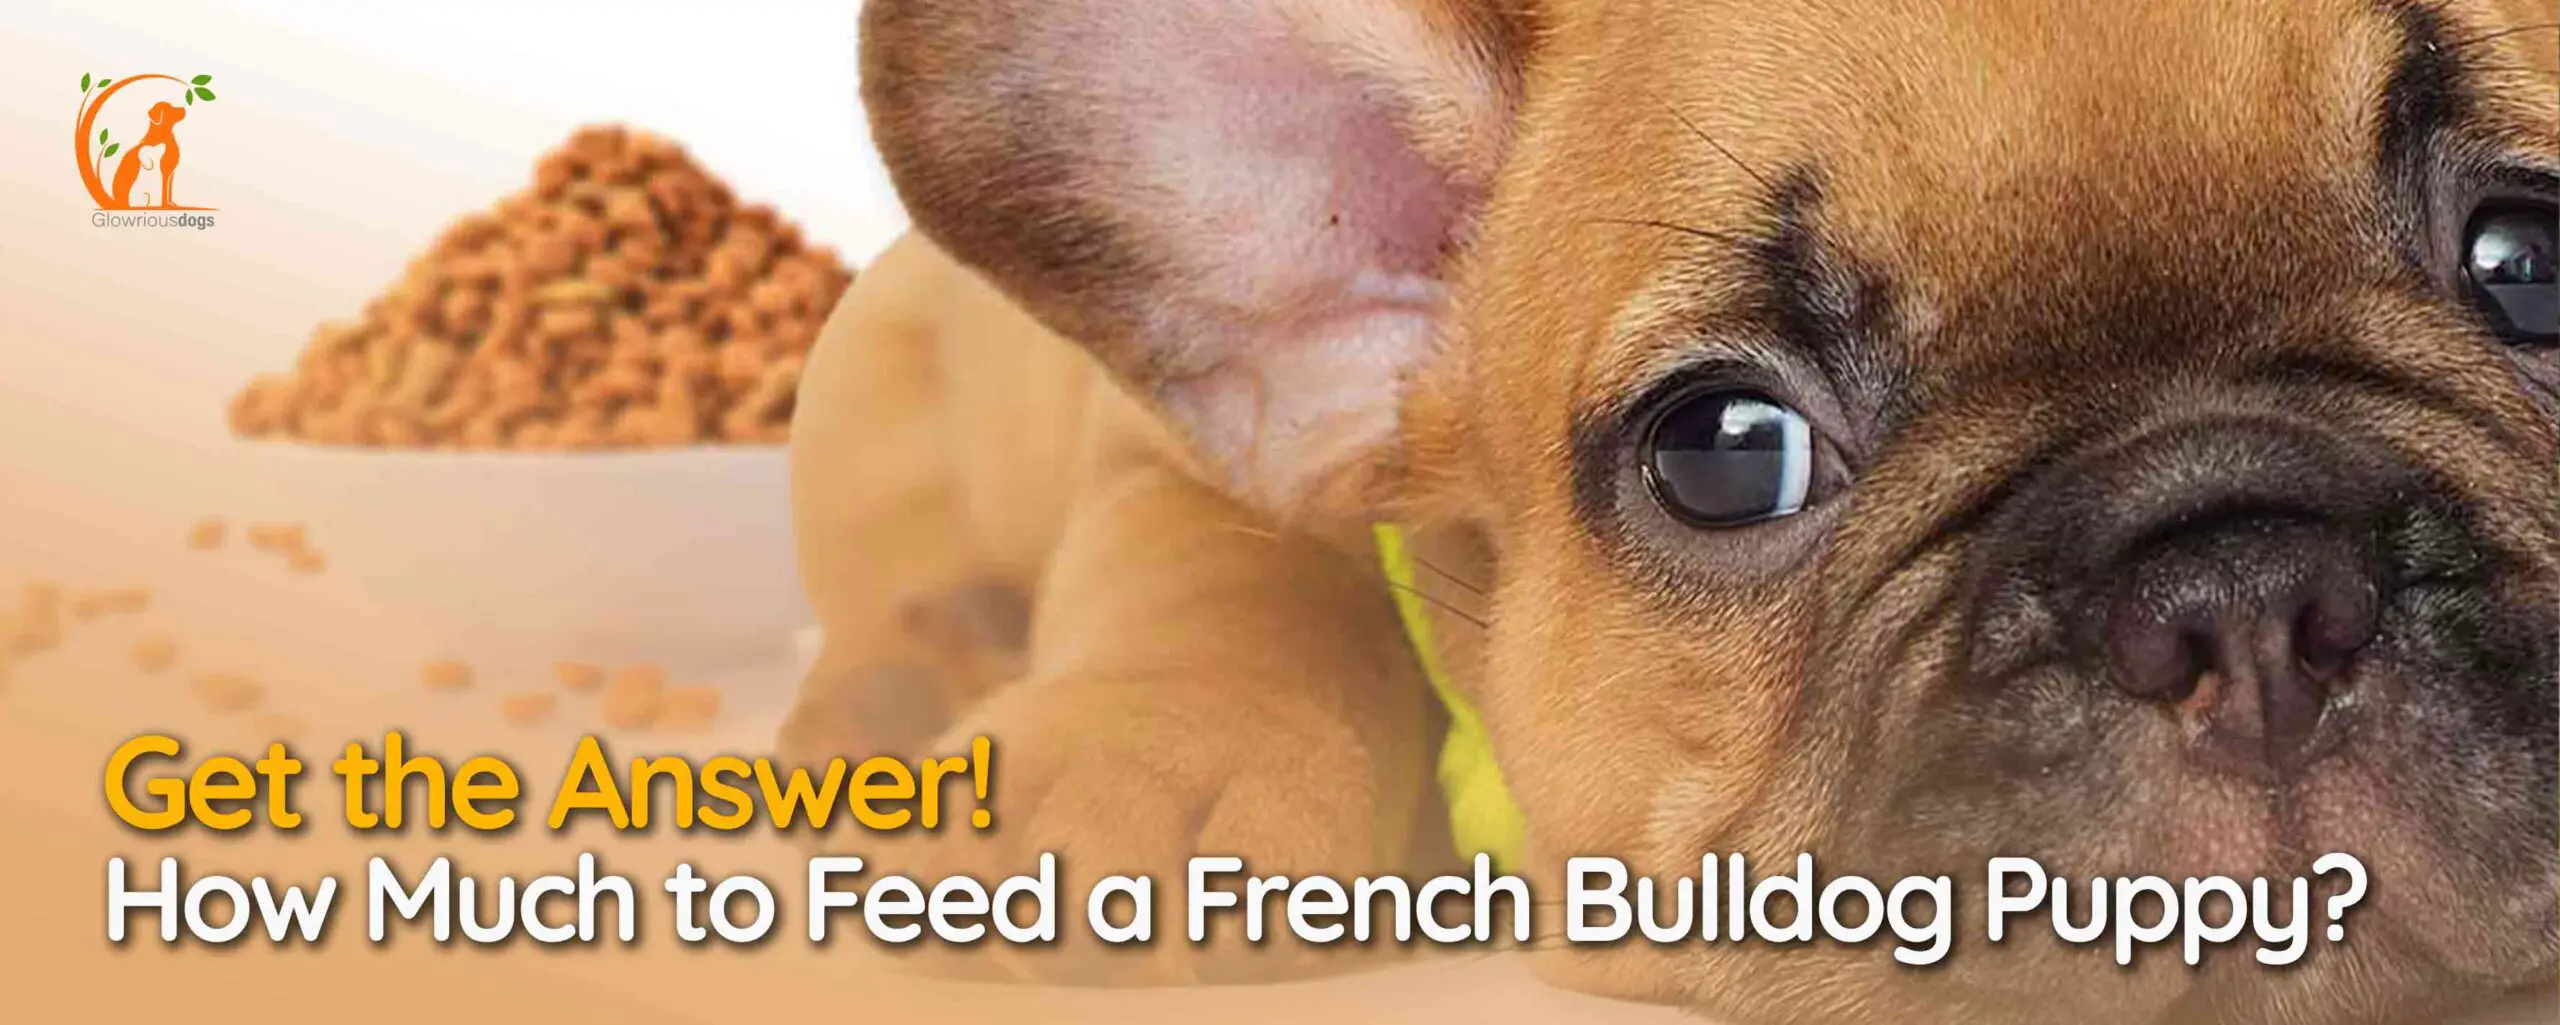 How Much to Feed a French Bulldog Puppy